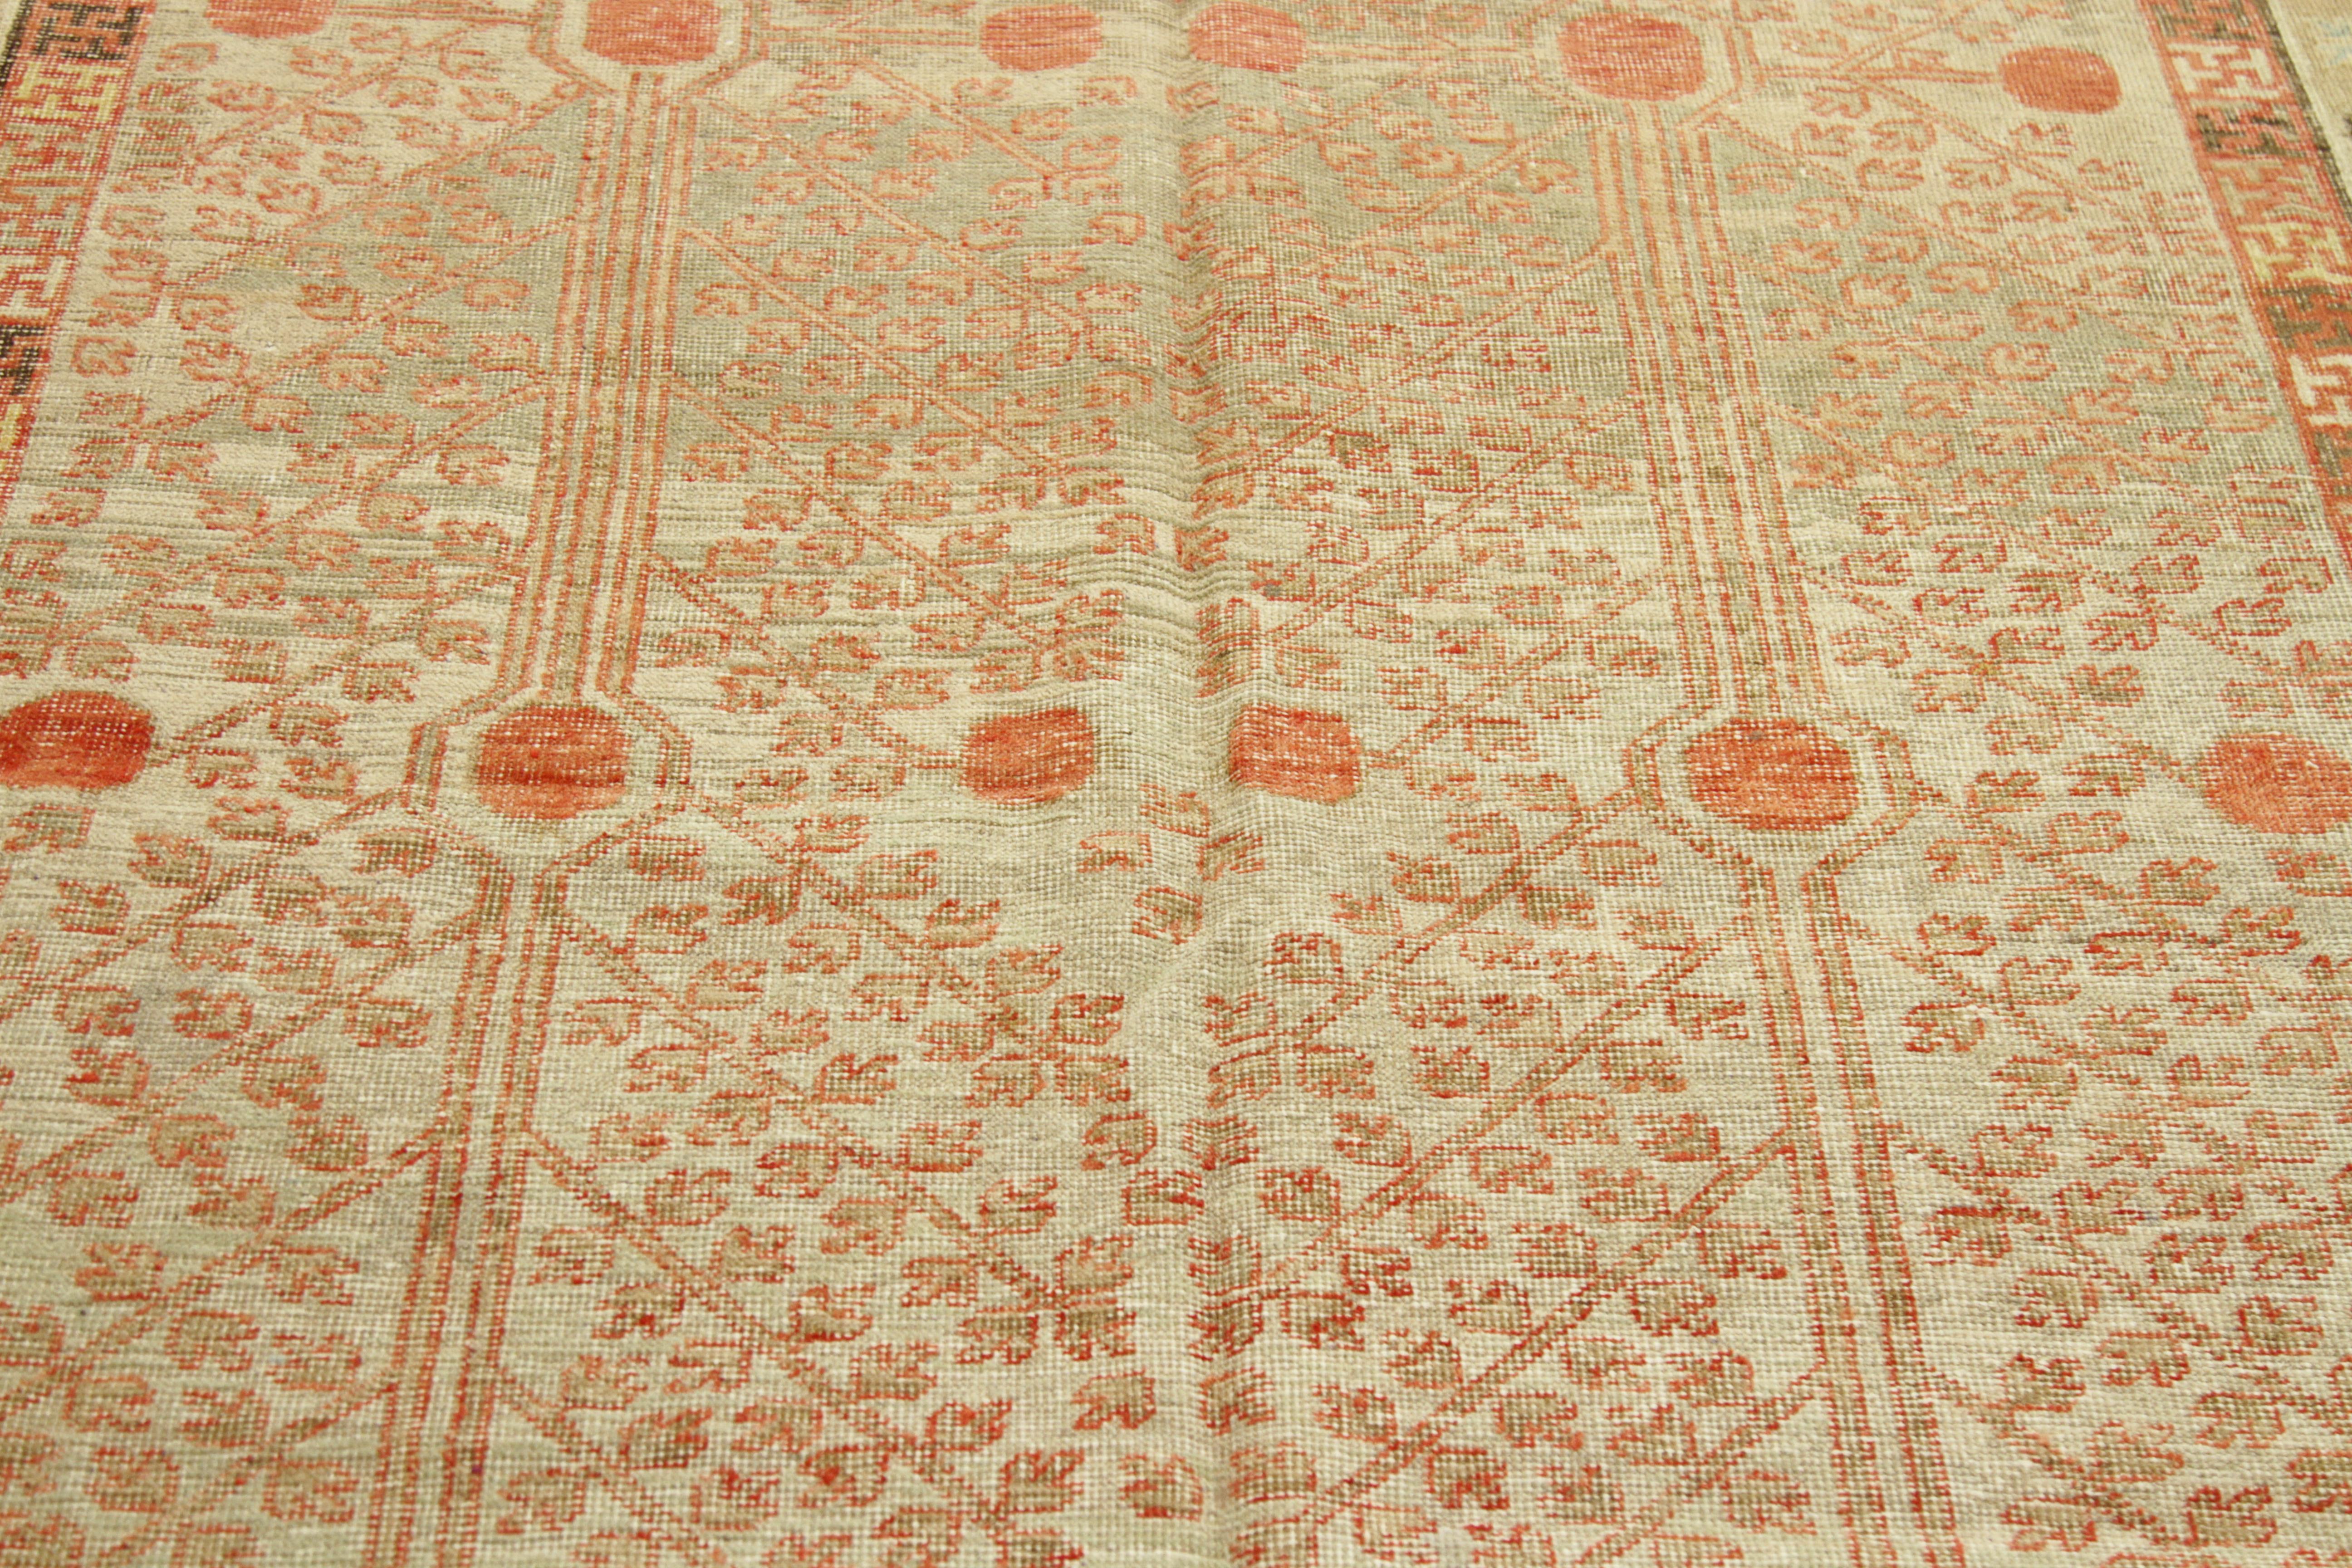 1910s Antique Central Asian Rug Khotan Style with Rust and Beige Nature Details For Sale 3